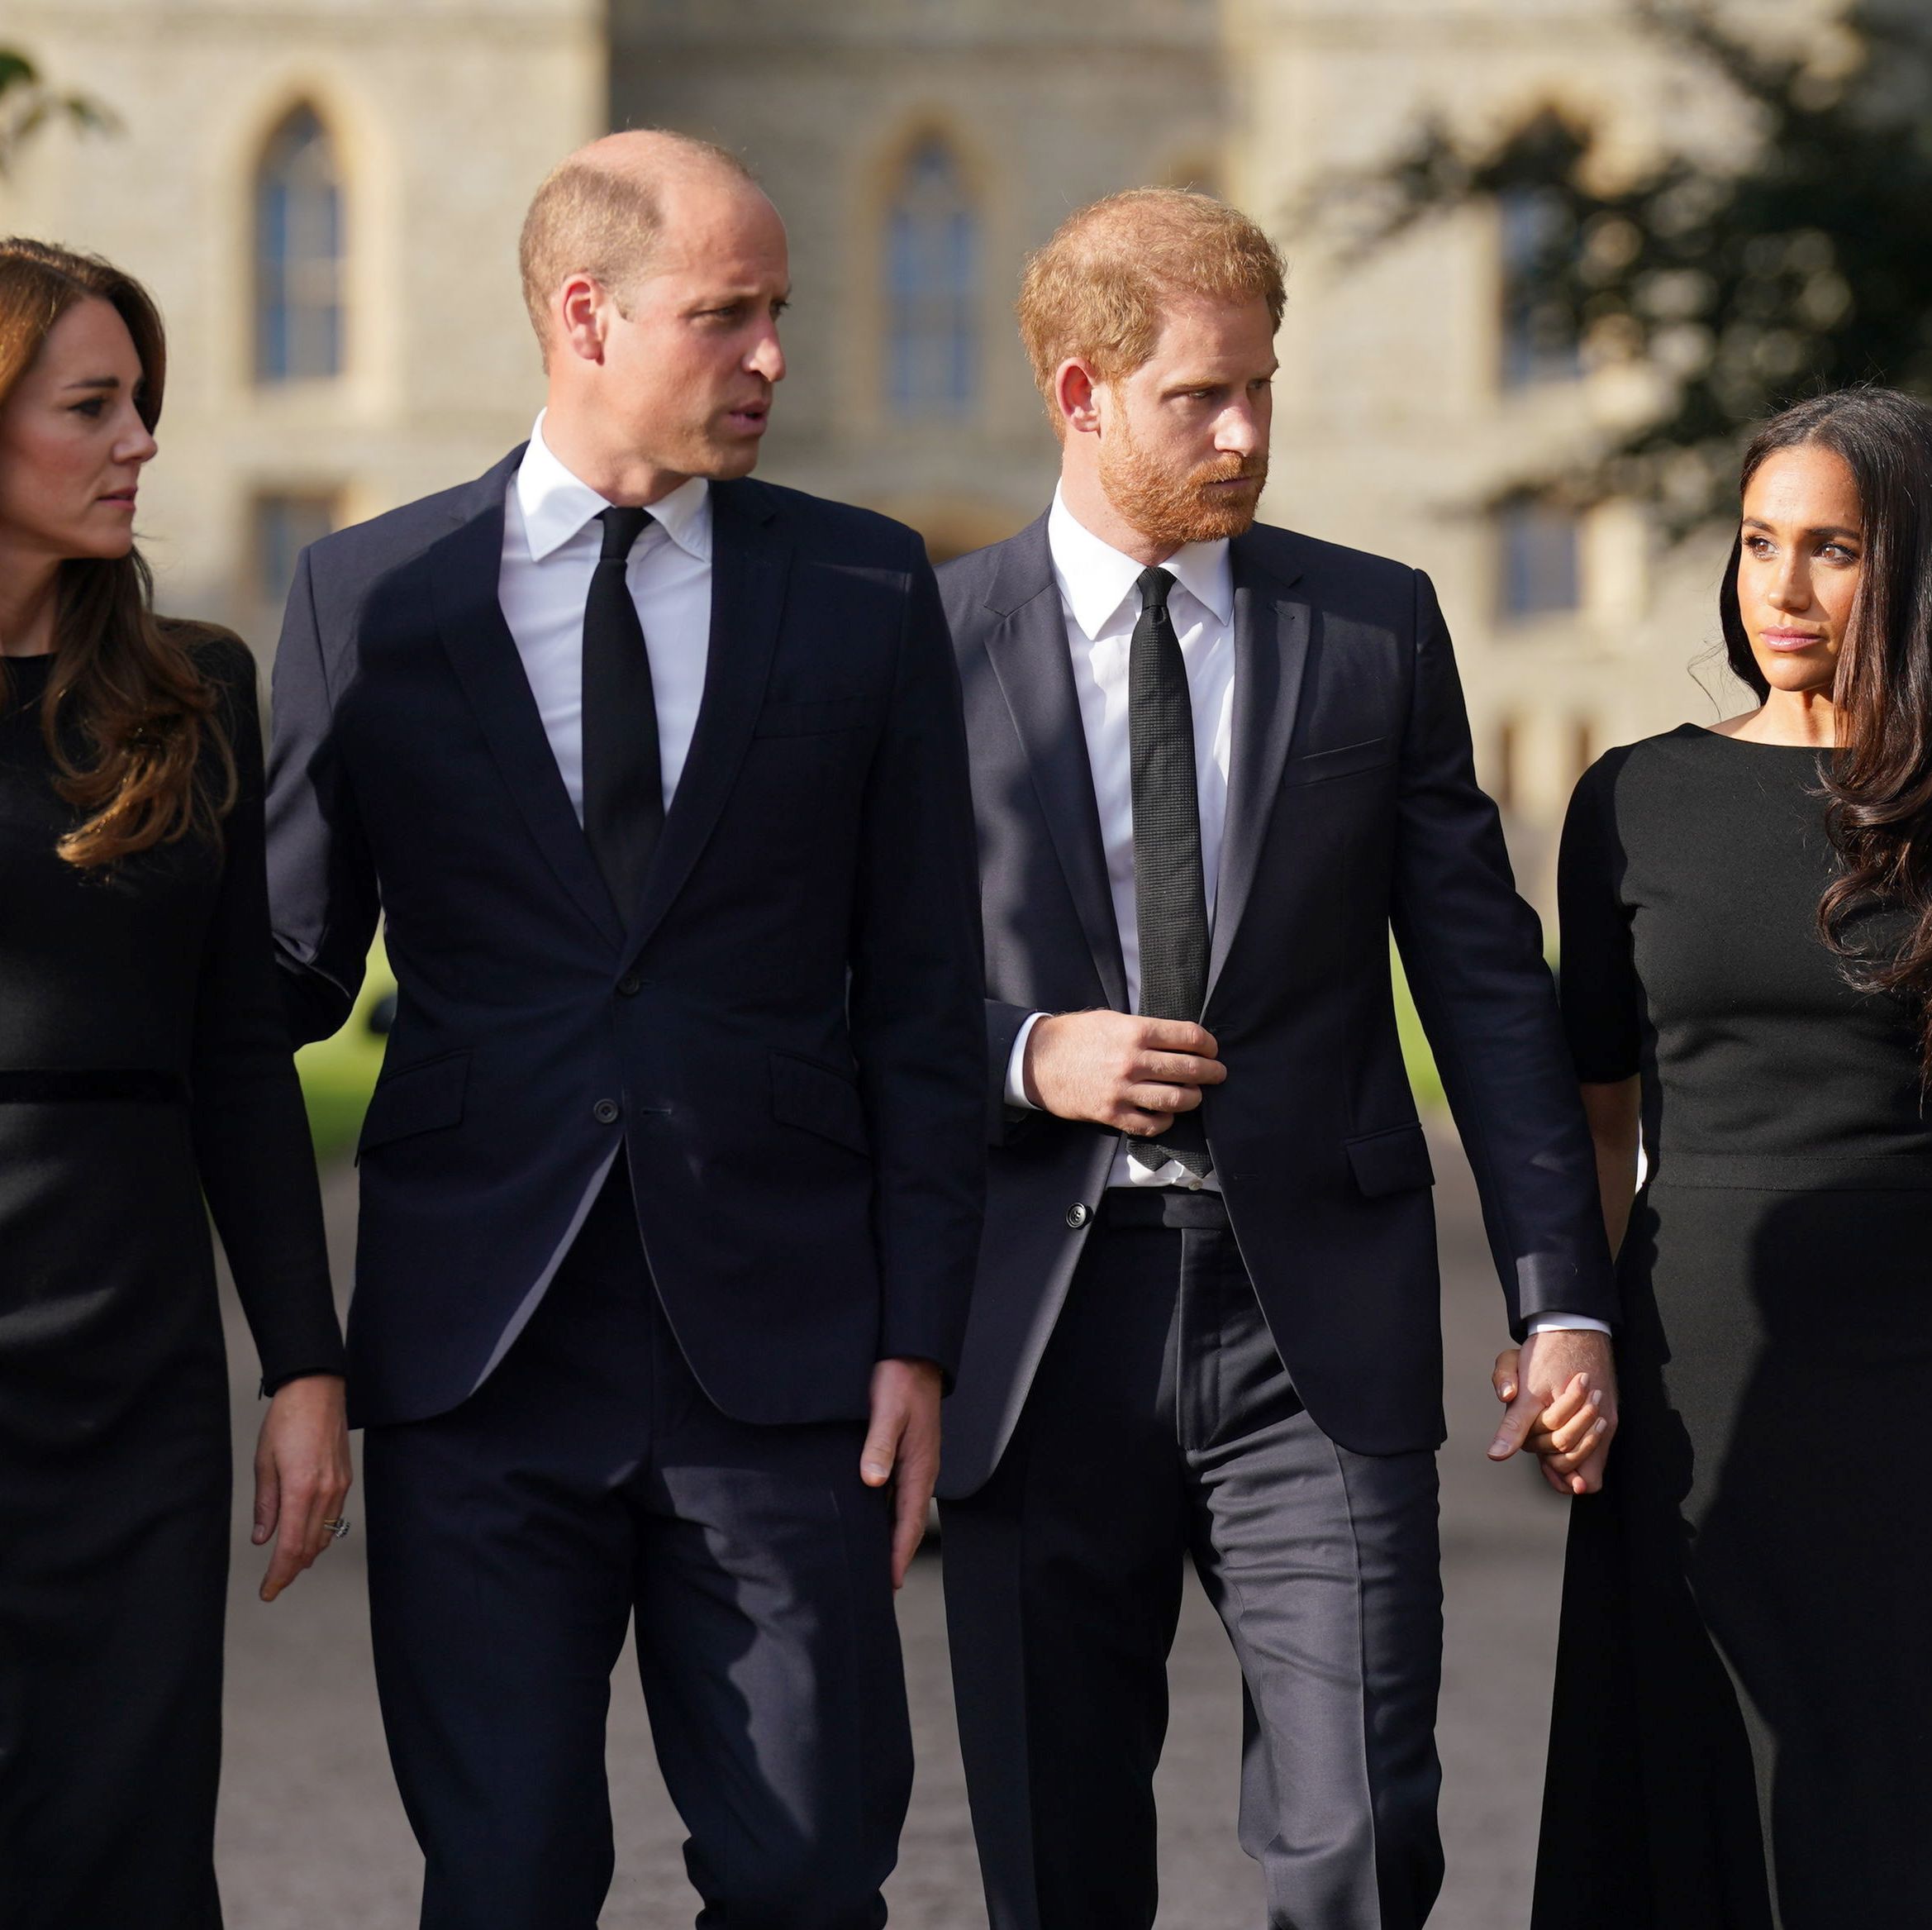 Meghan Markle Recalls Kate Middleton and Prince William Not Wanting to Hug Her During First Meeting